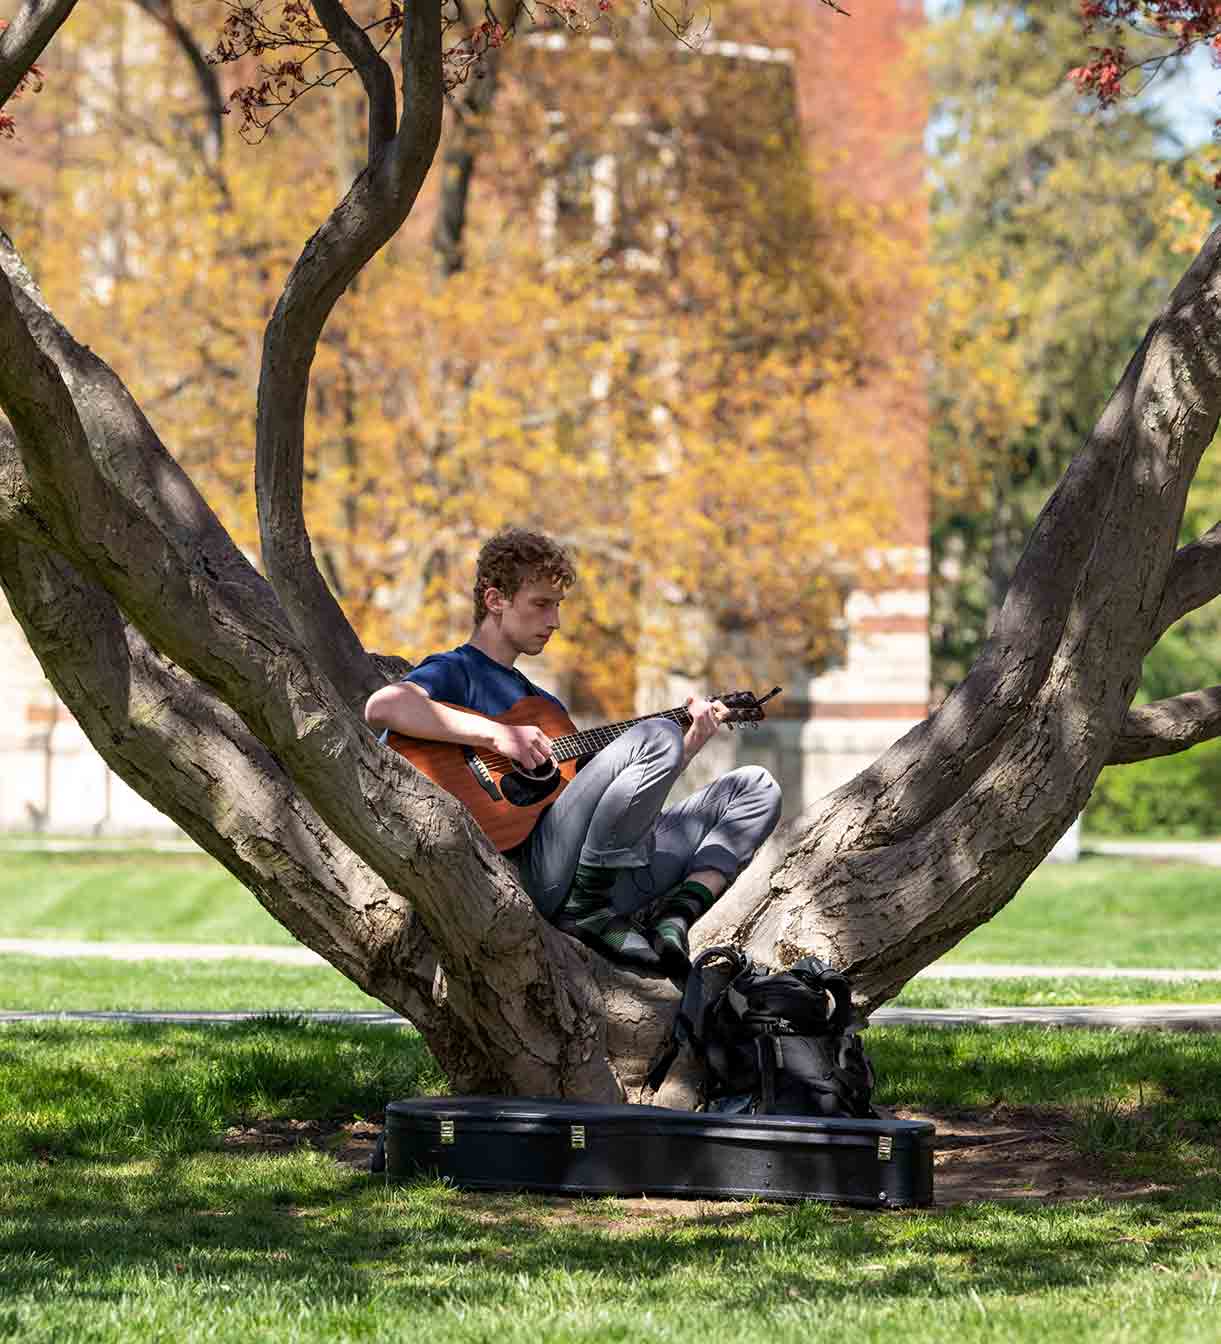 A student sits in a tree on a sunny day playing a guitar